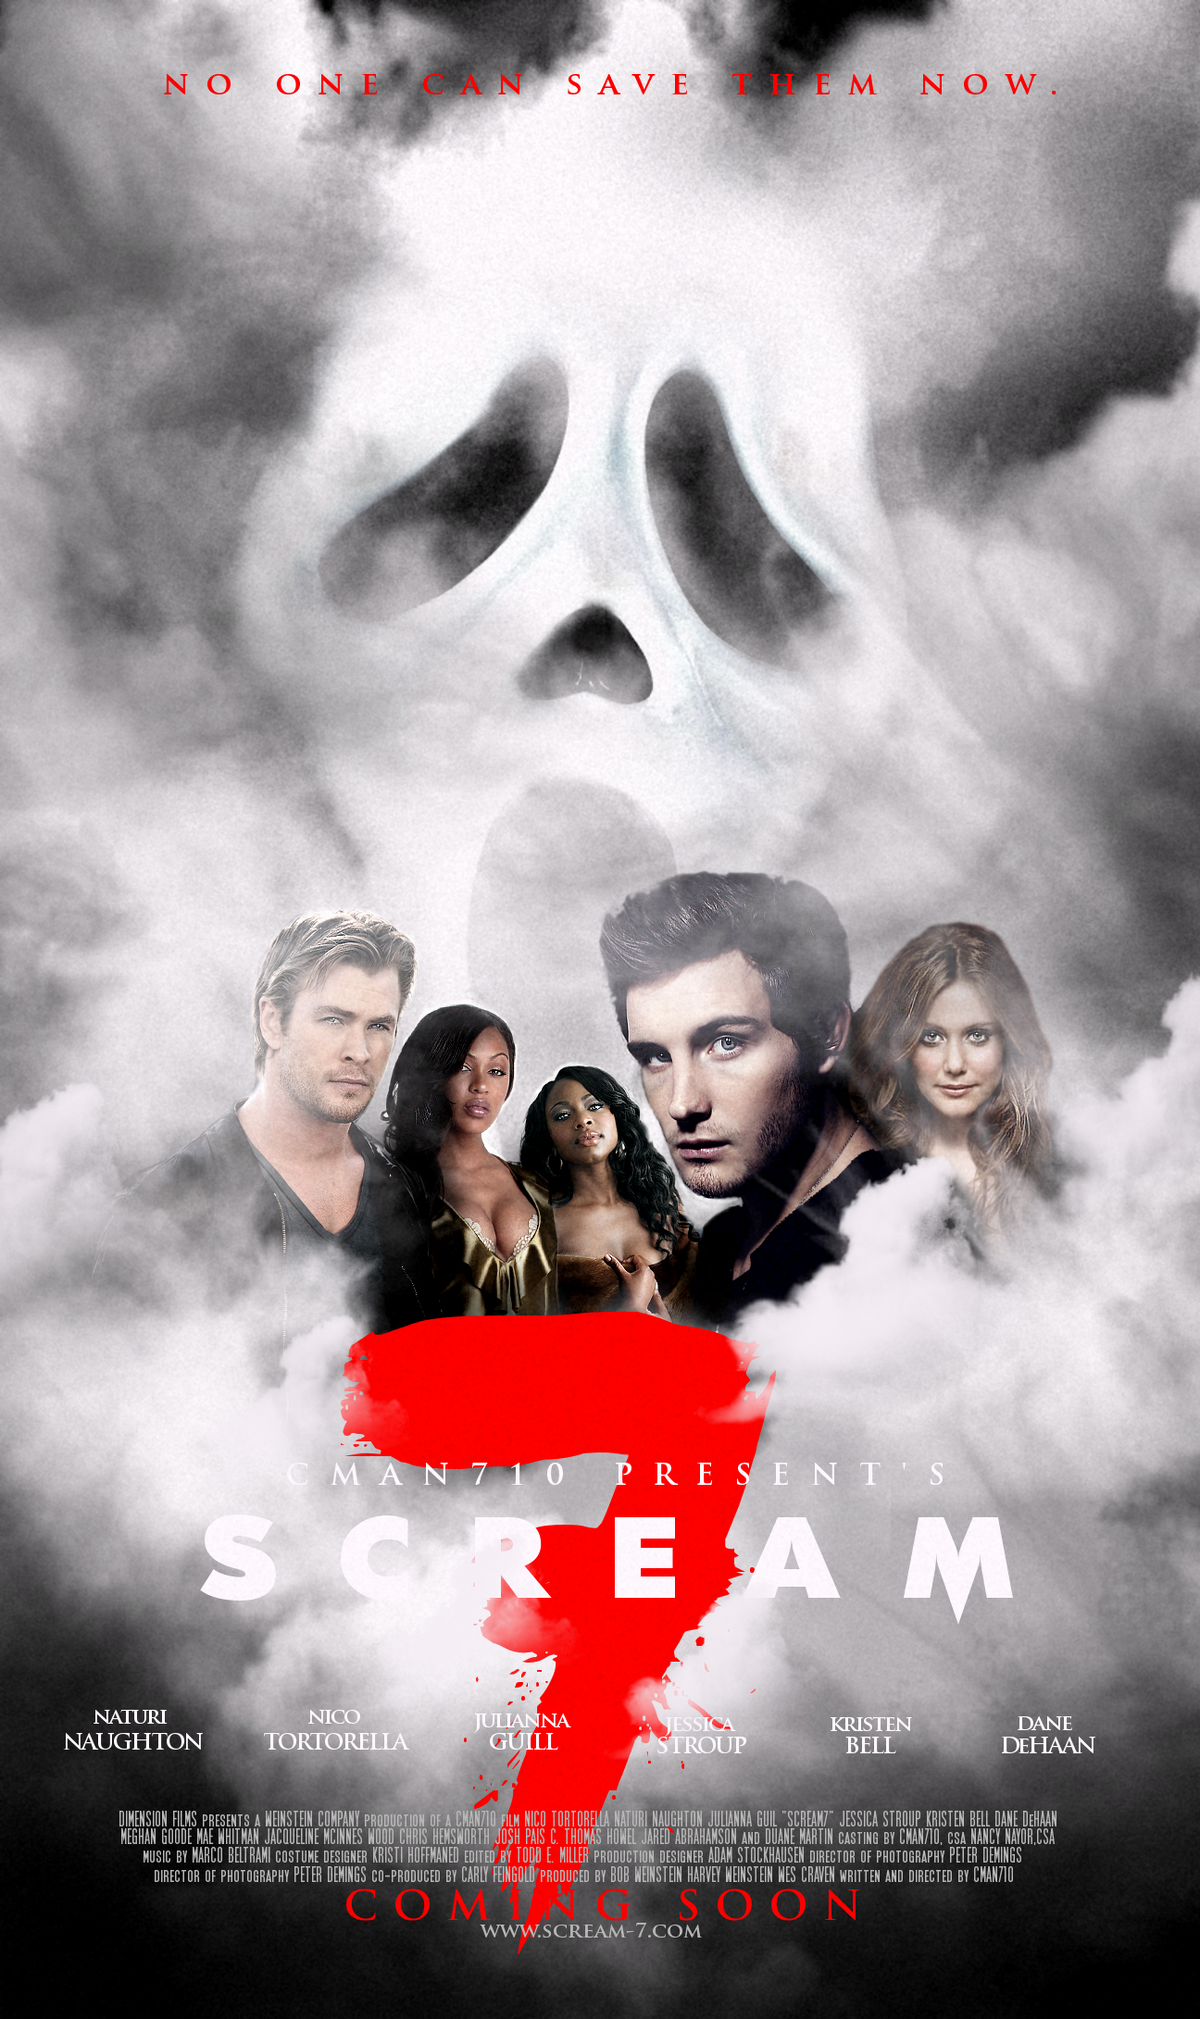 Is Scream 6 The Last Movie and Will There Be Scream 7? Answered